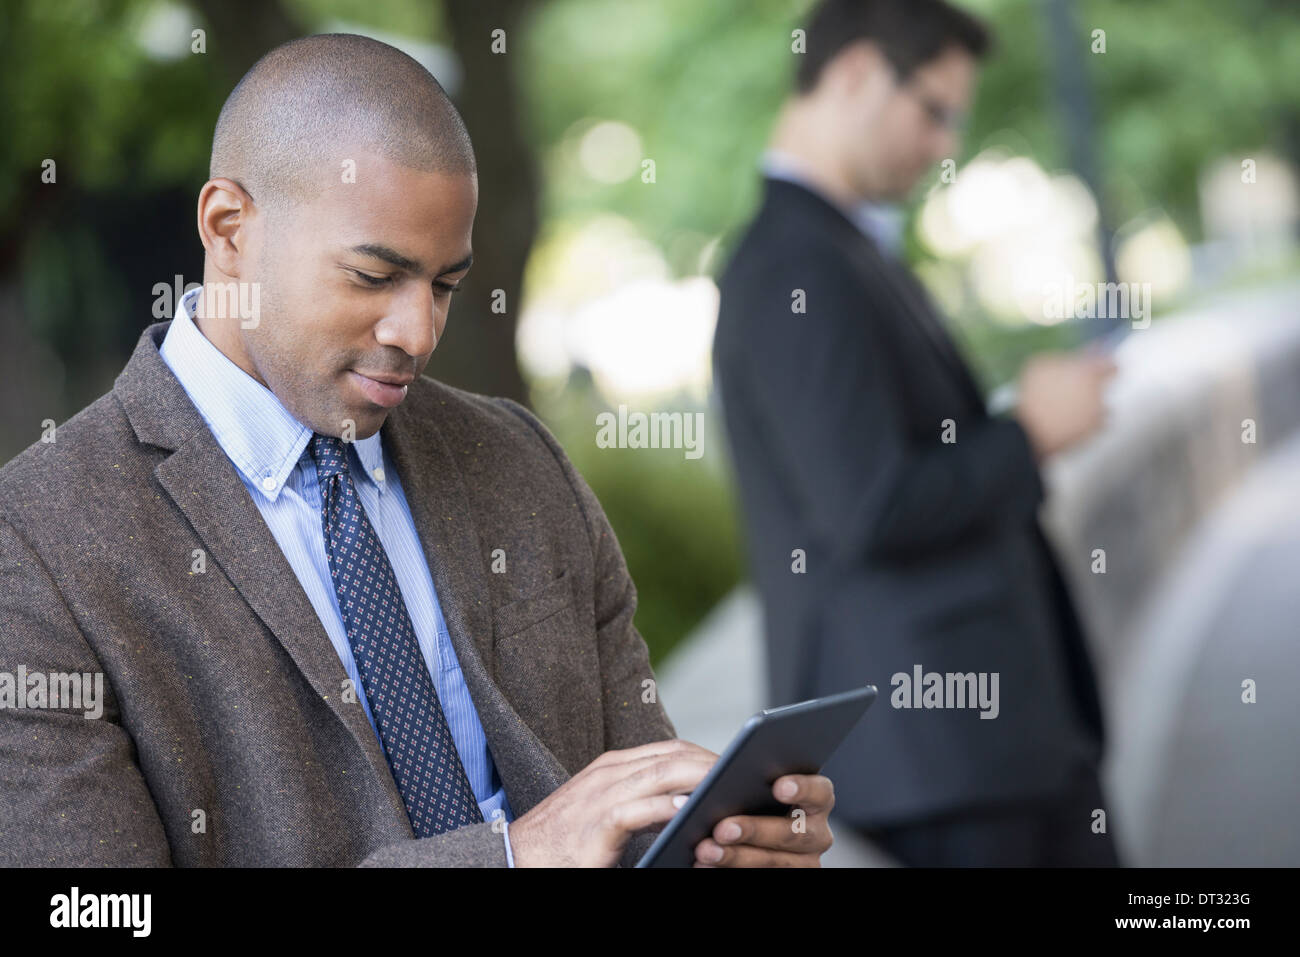 Man using a digital tablet and one checking a smart phone Stock Photo